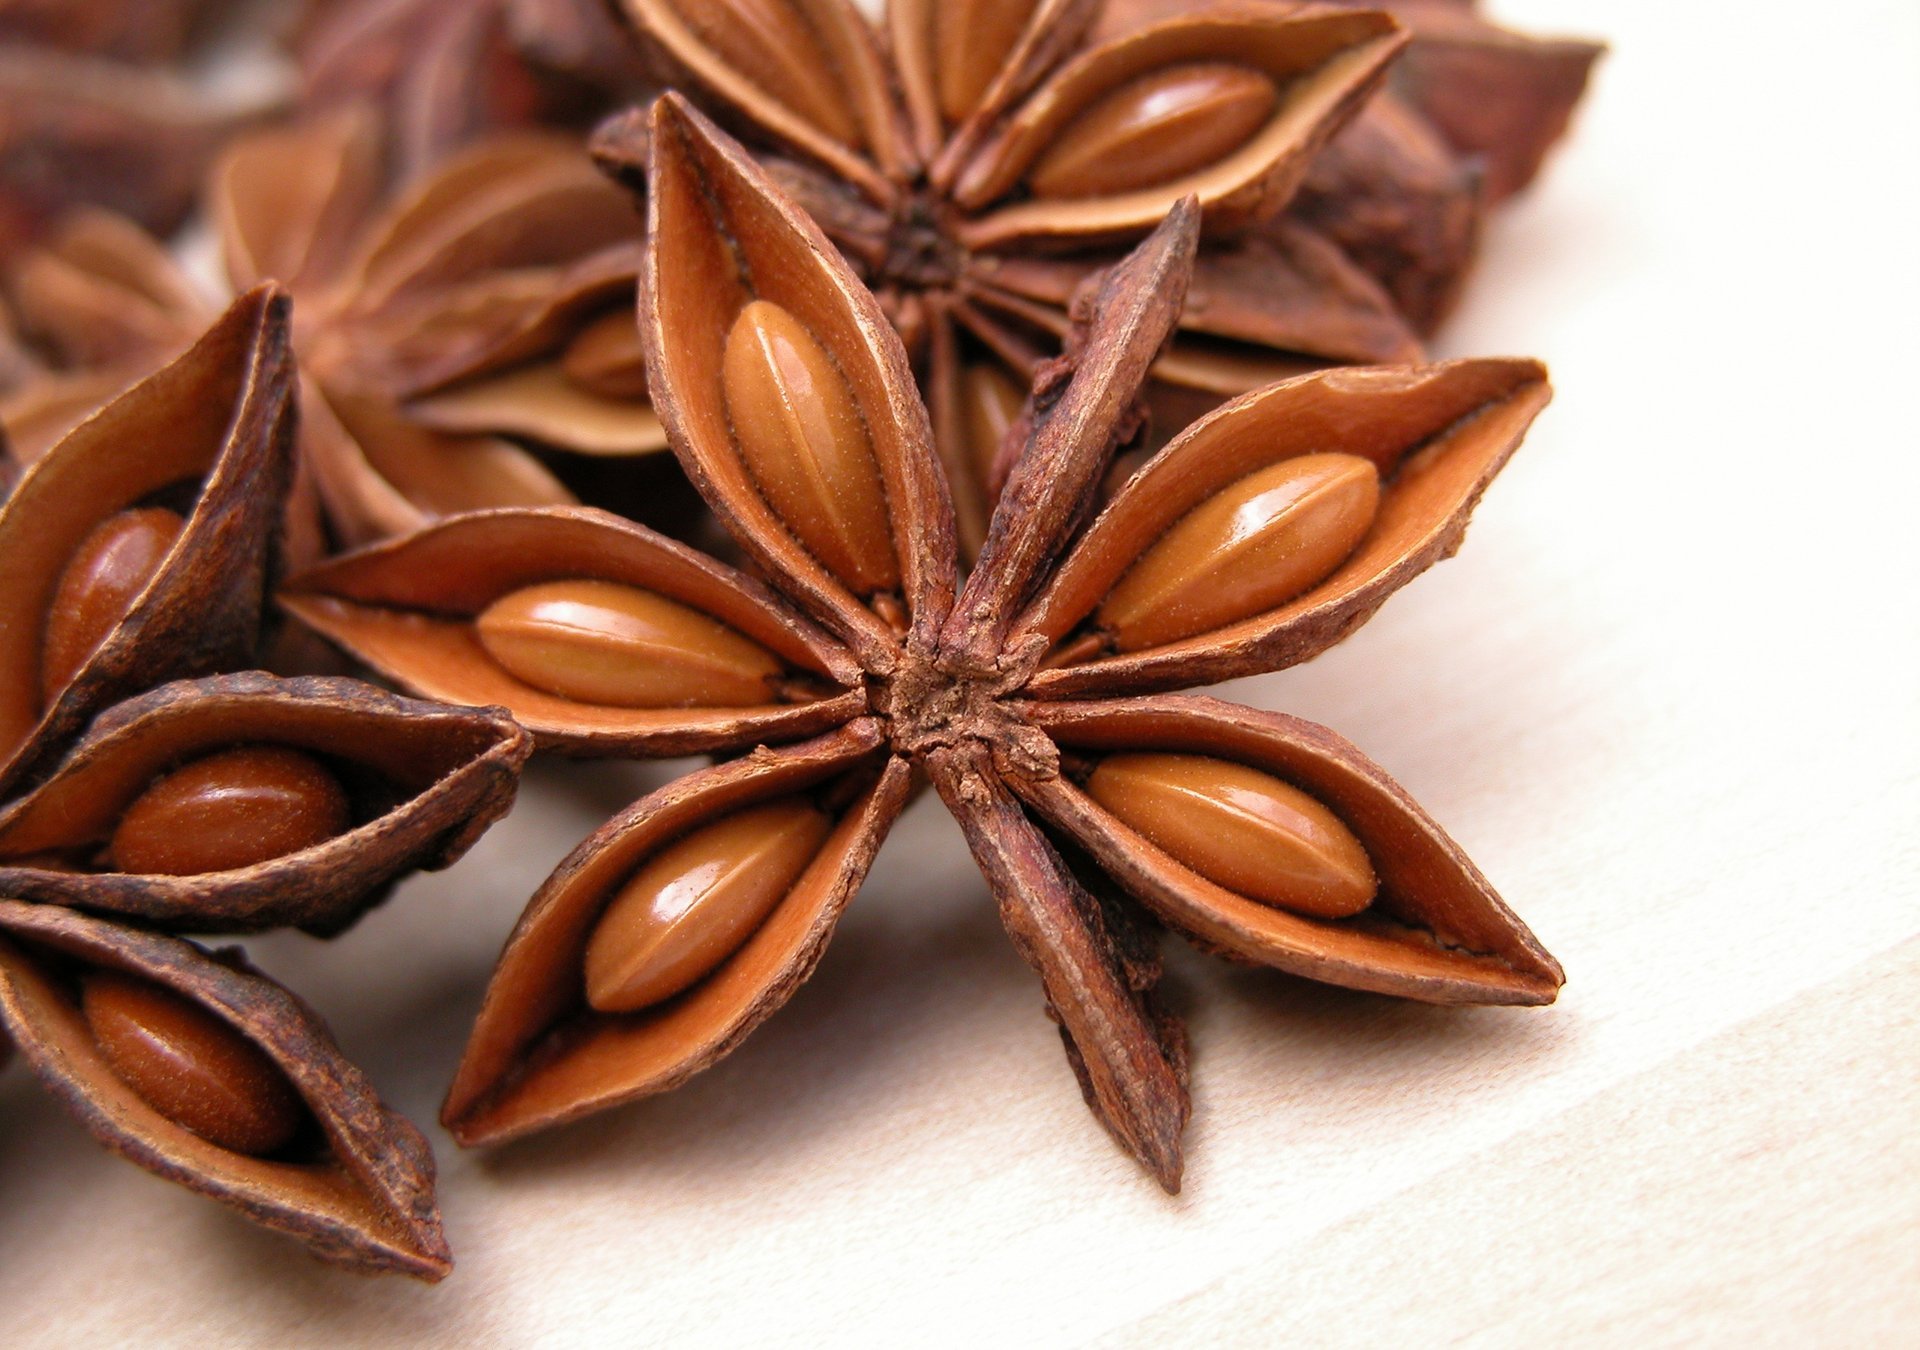 Spicy stars of anise and star anise